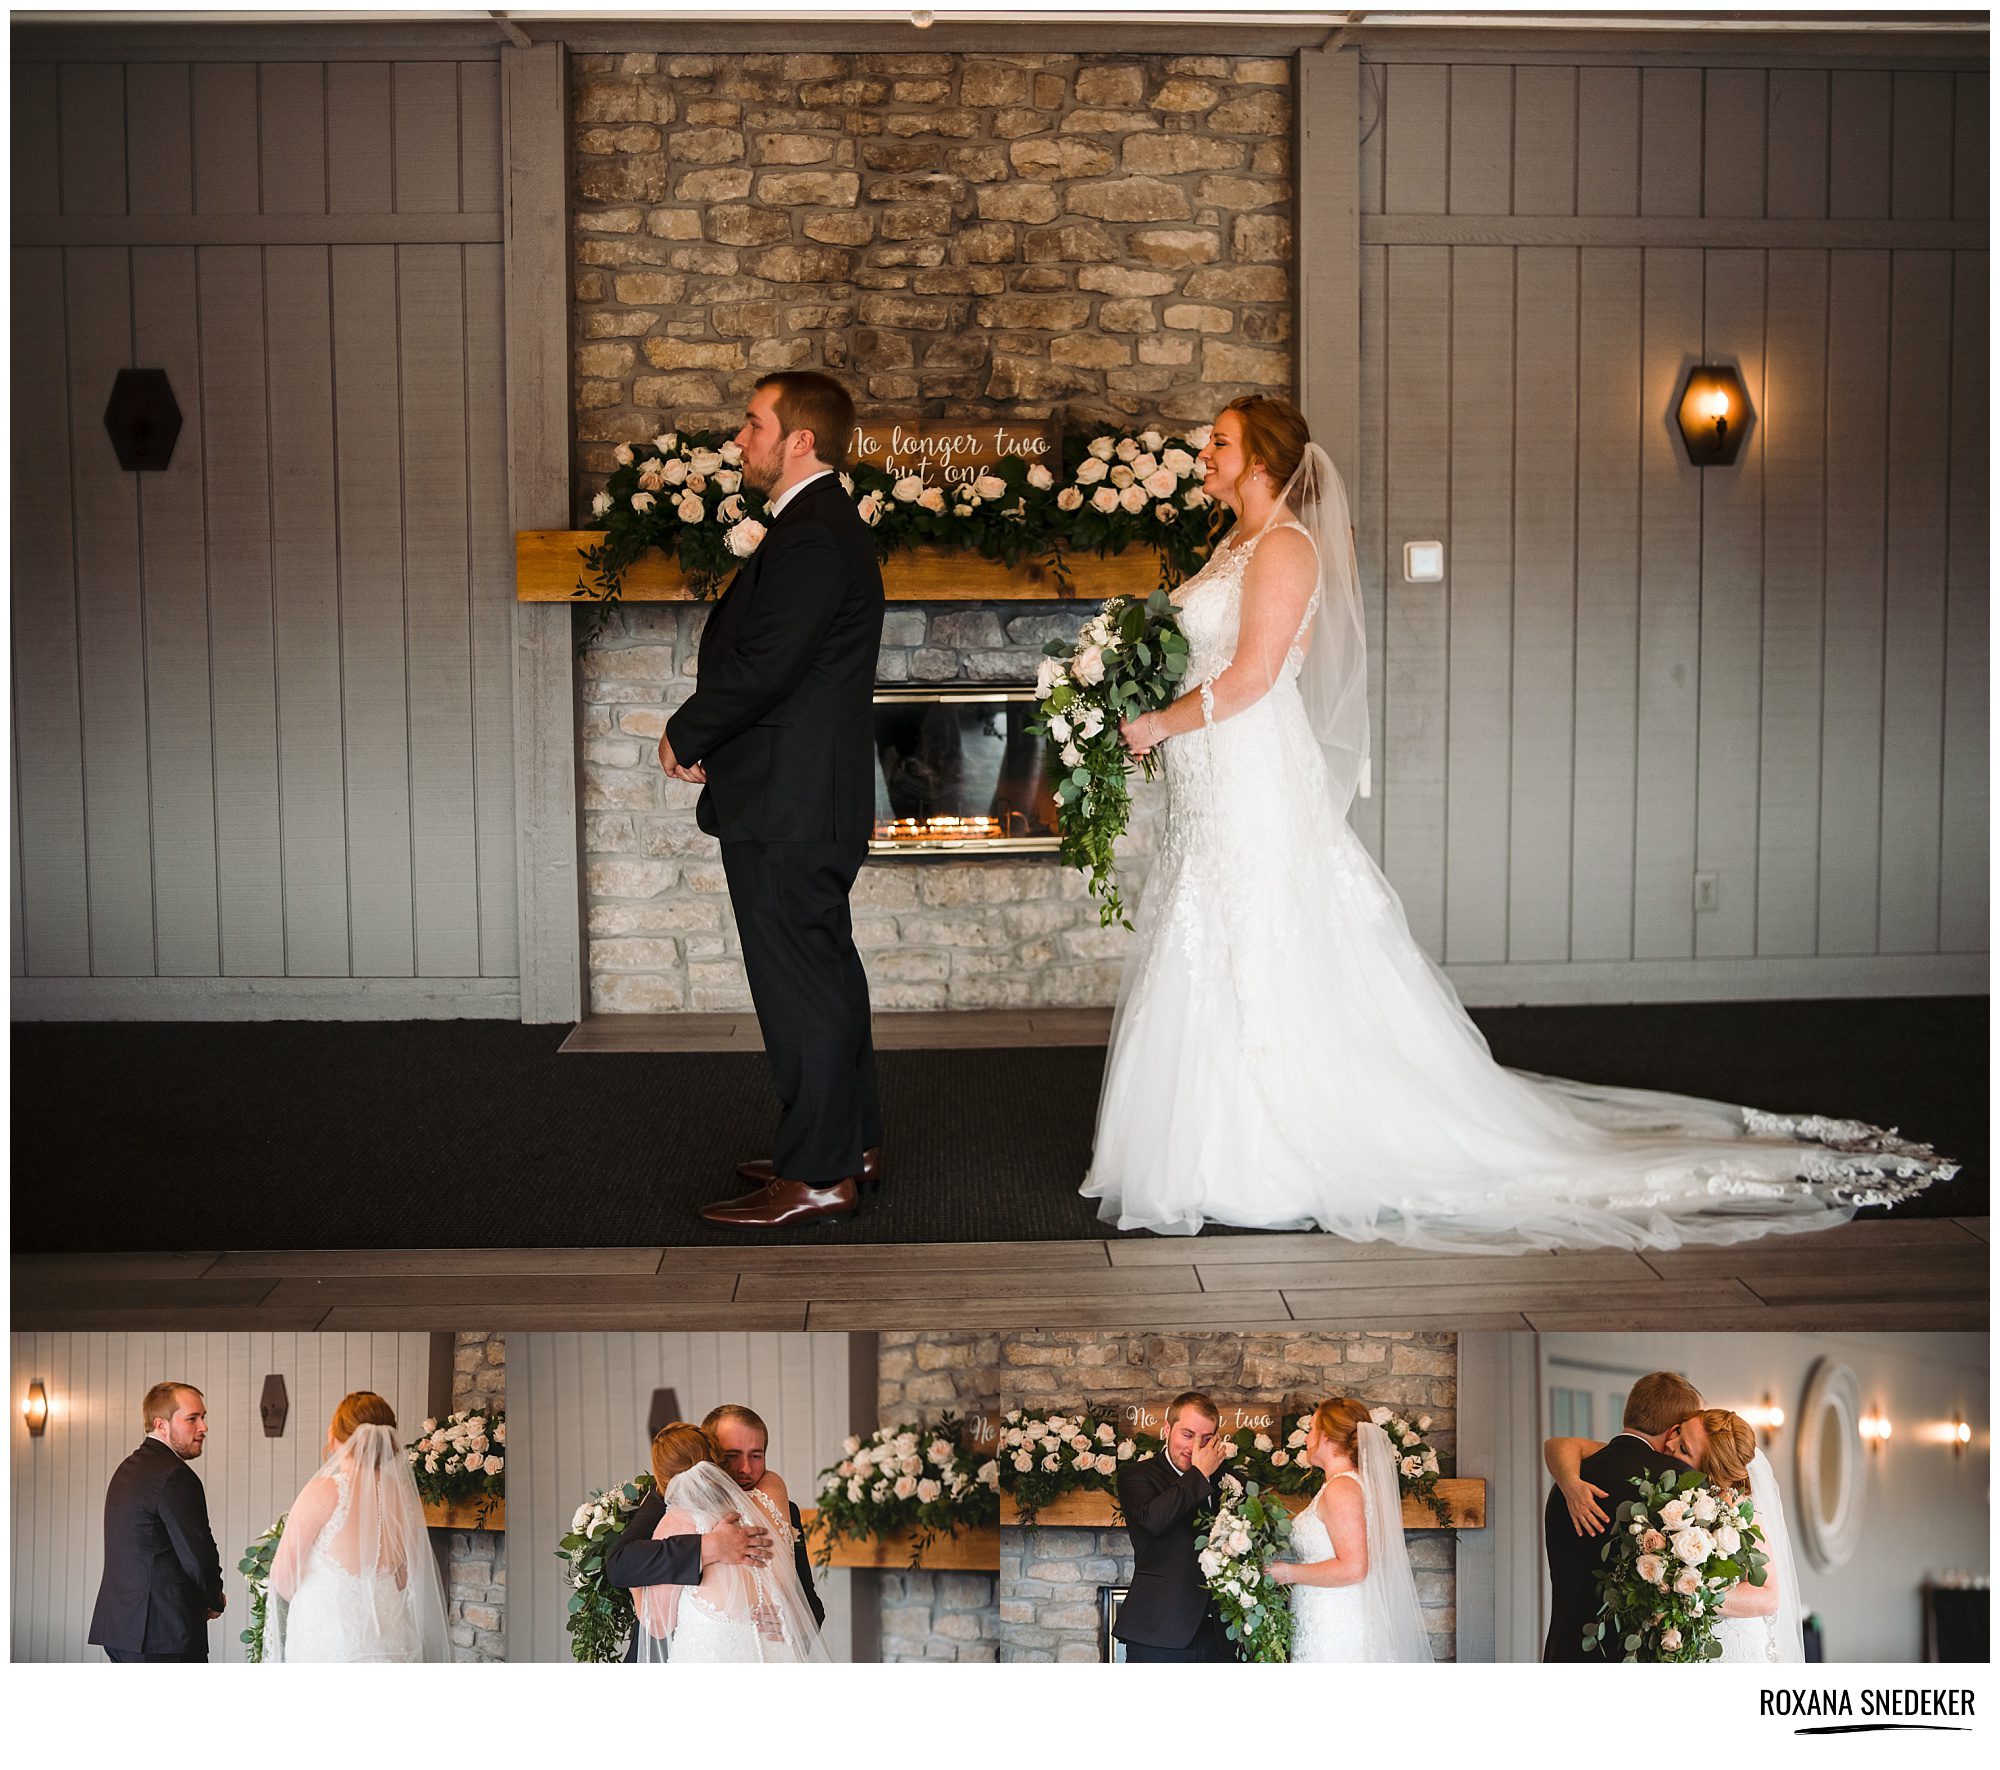 Wedding at The Willows - The first look